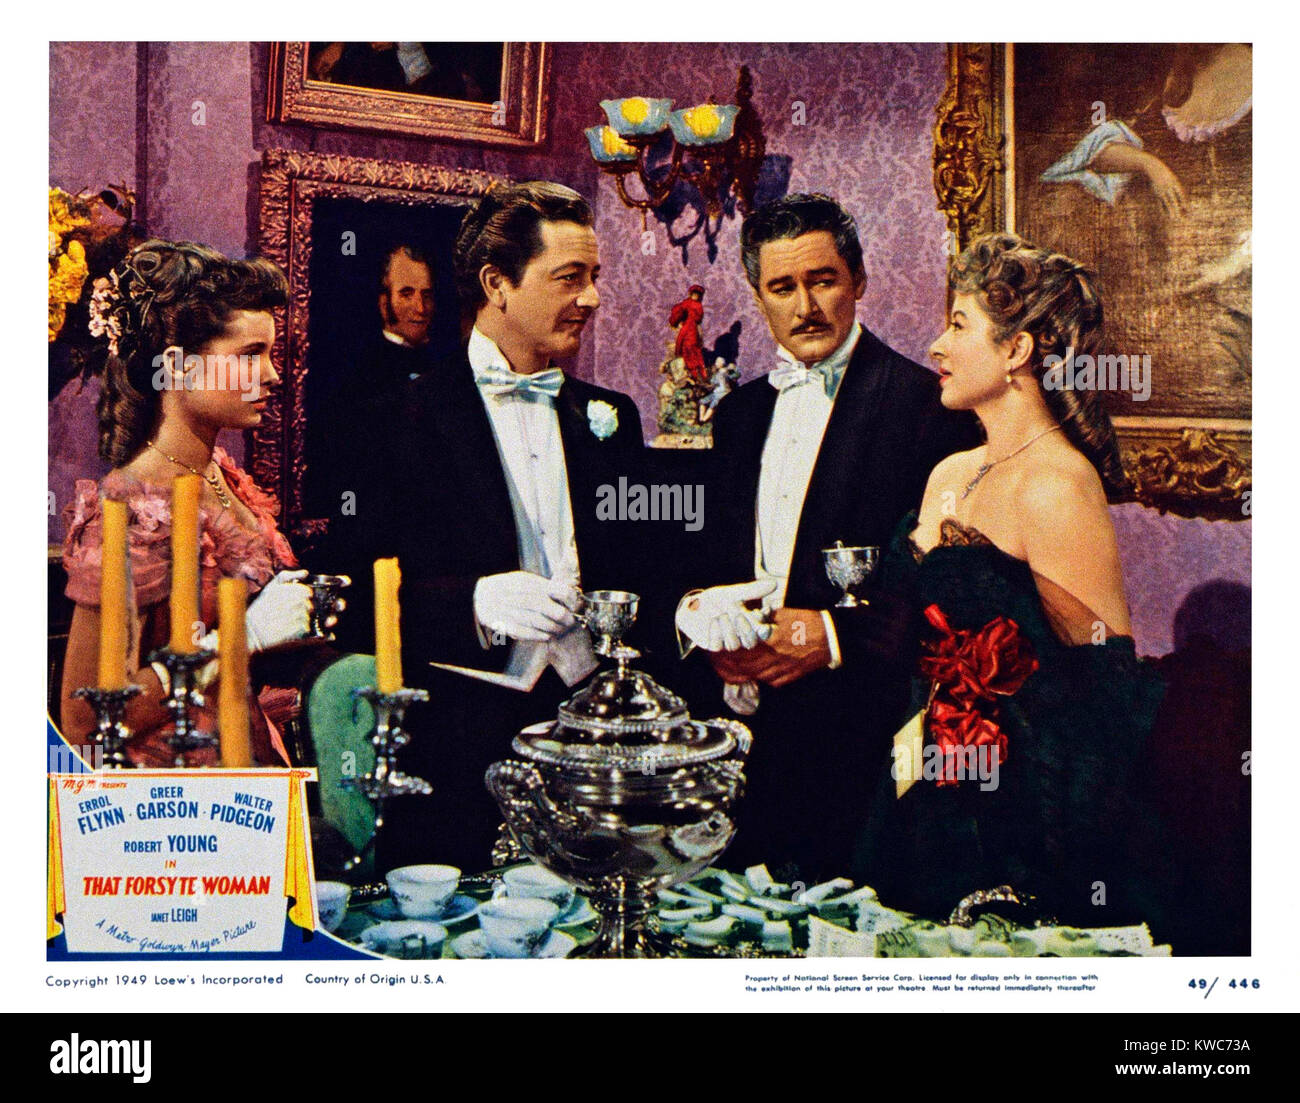 THAT FORSYTE WOMAN, US lobbycard, from left: Janet Leigh, Robert Young ...